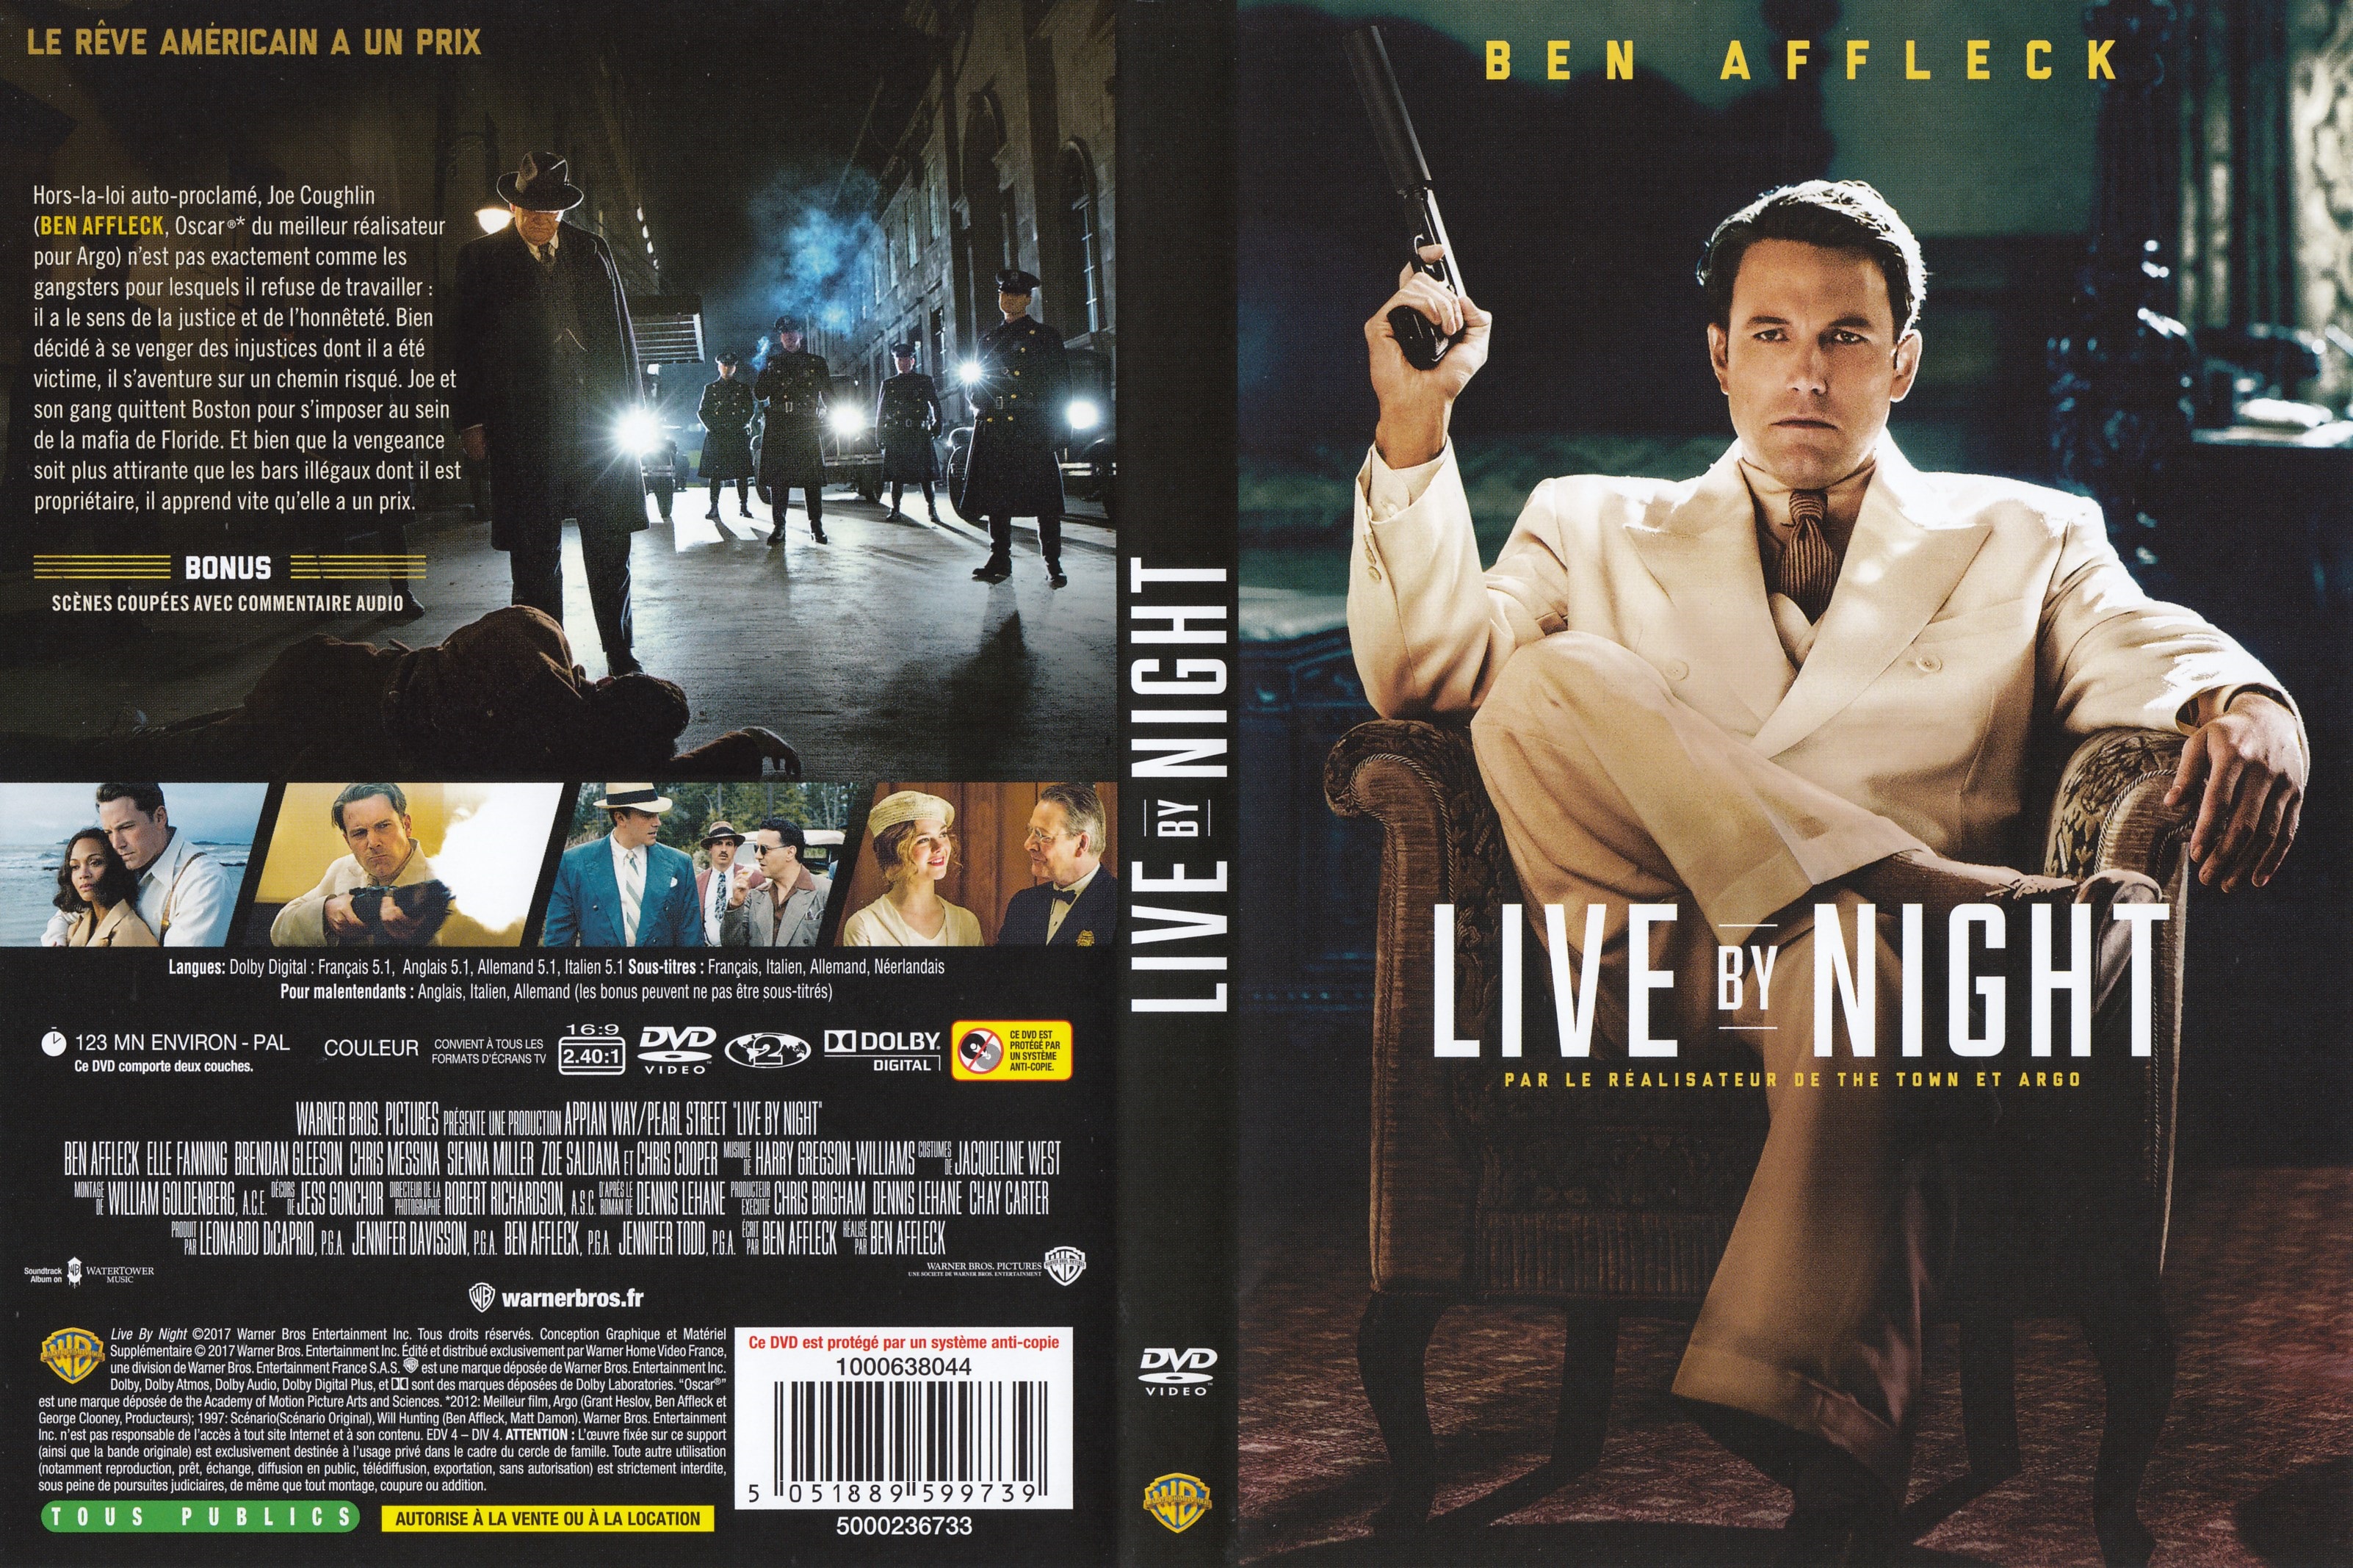 Jaquette DVD Live By Night